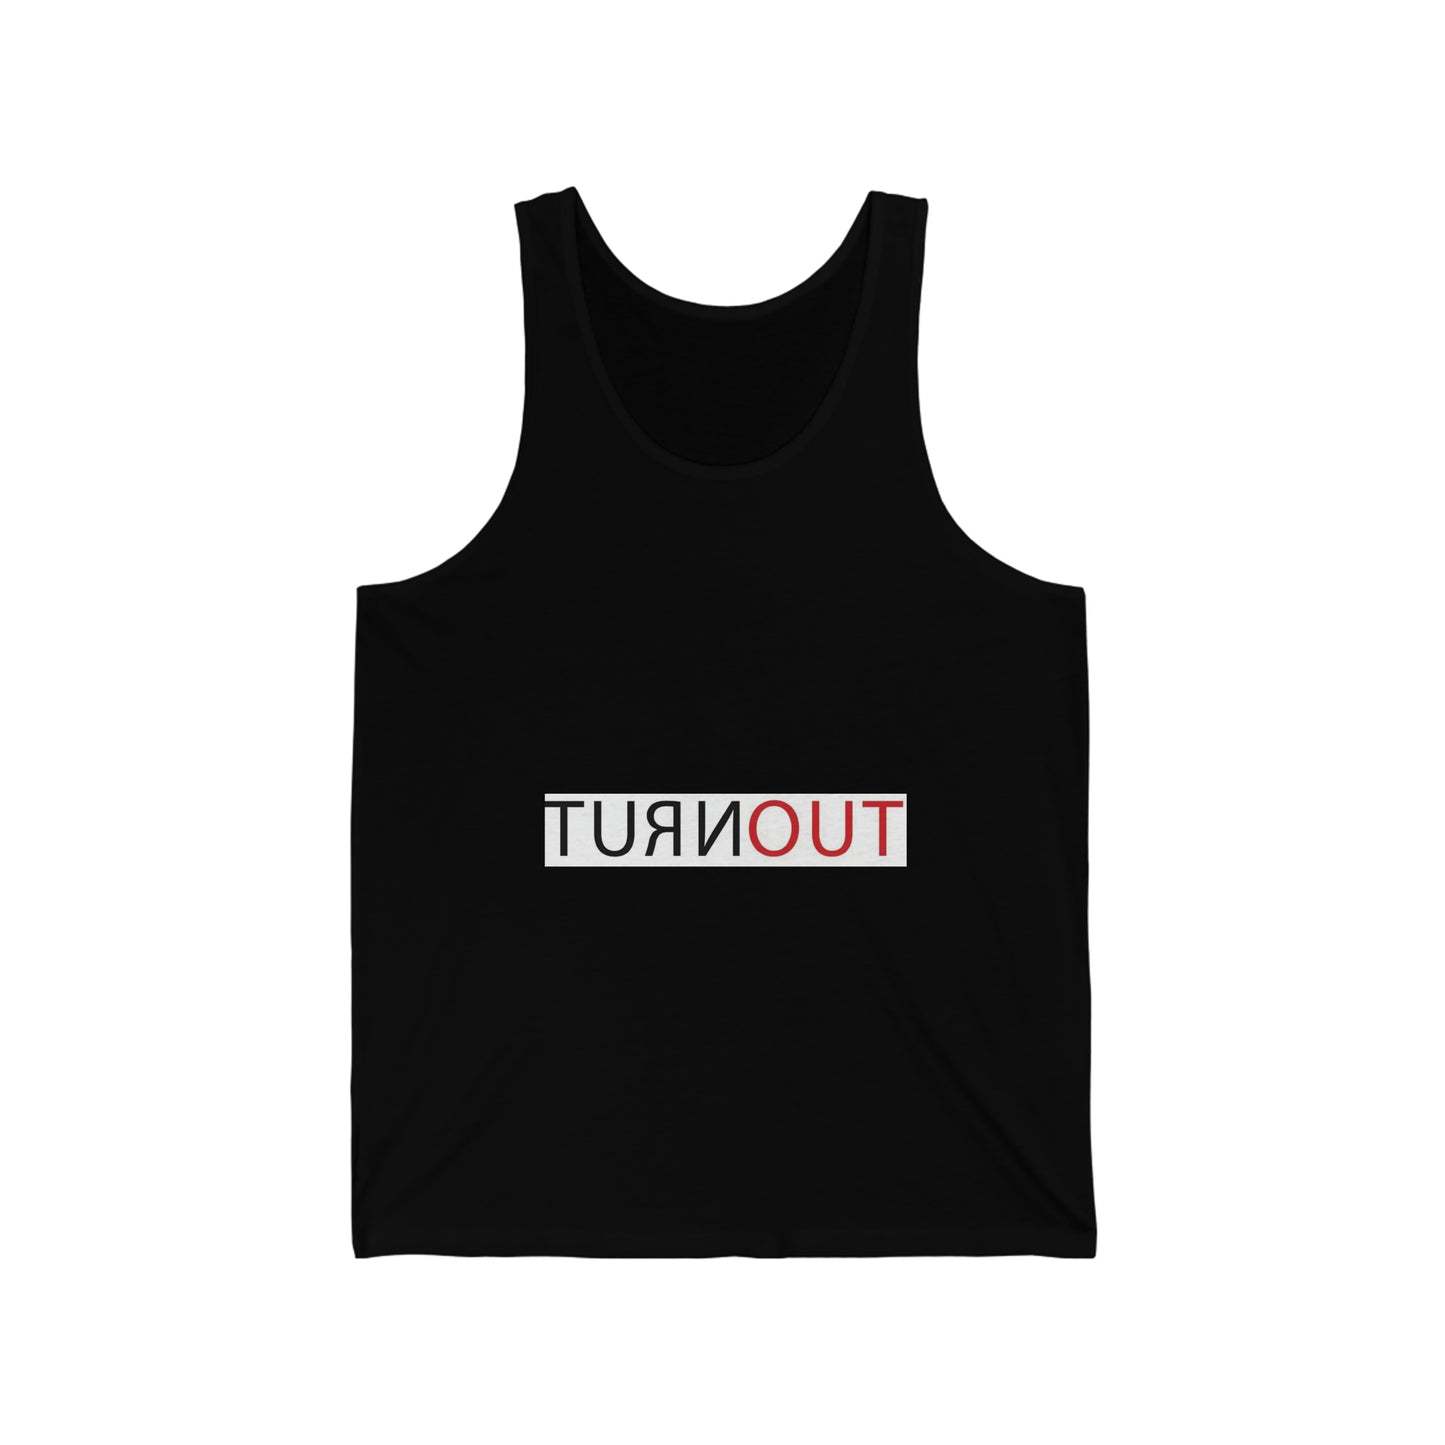 Turn Out Unisex Jersey Tank